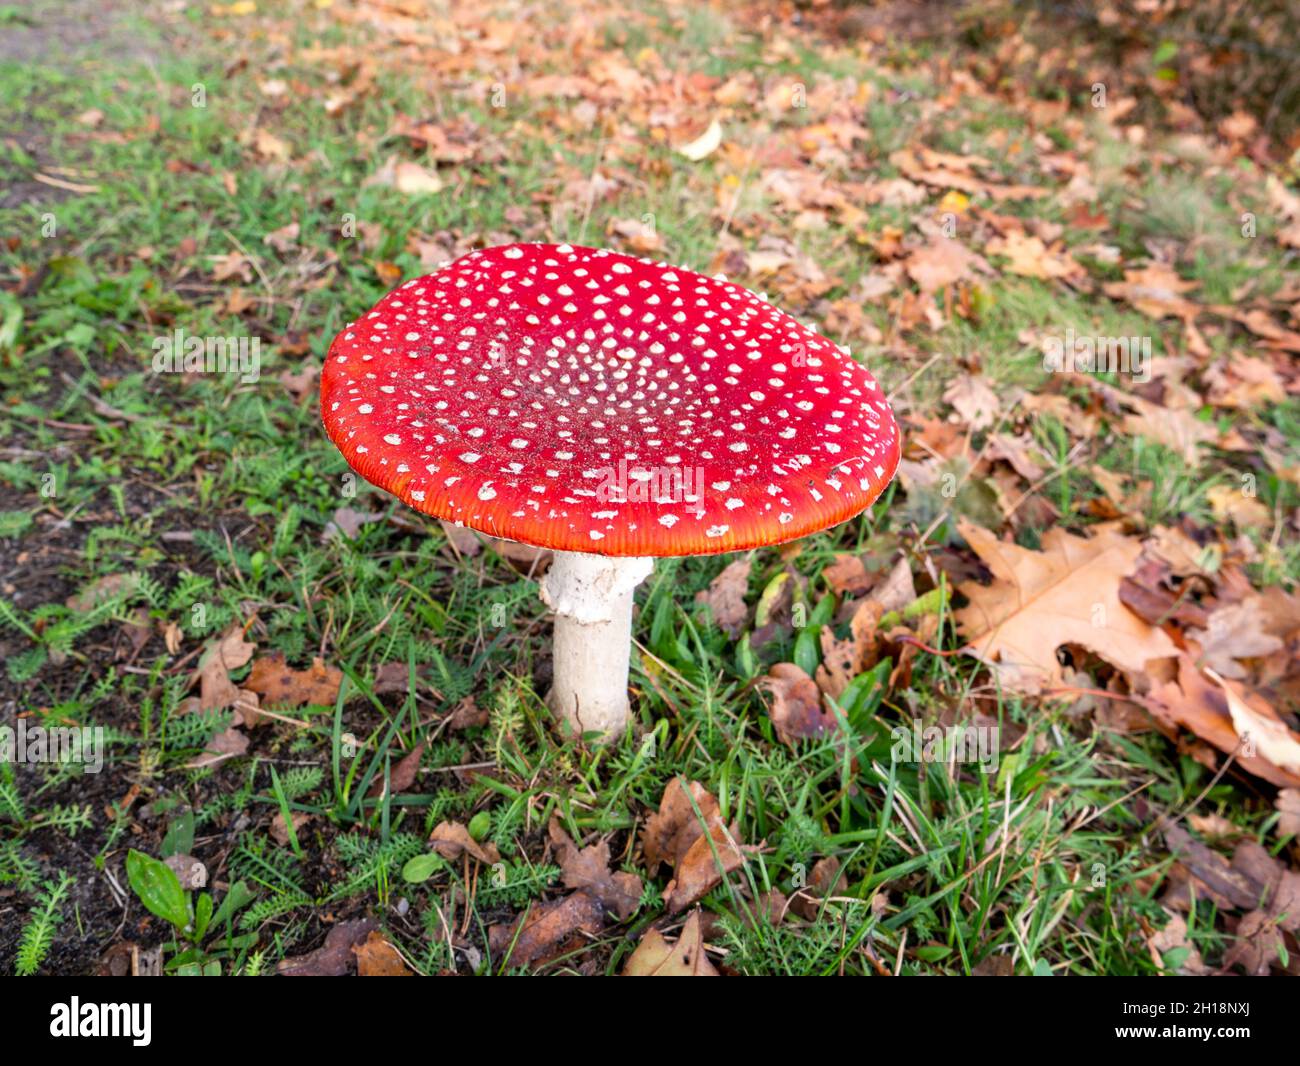 Fly agaric, Amanita muscaria, fruiting body of poisonous fungus in grass with autumn leaves, Netherlands Stock Photo